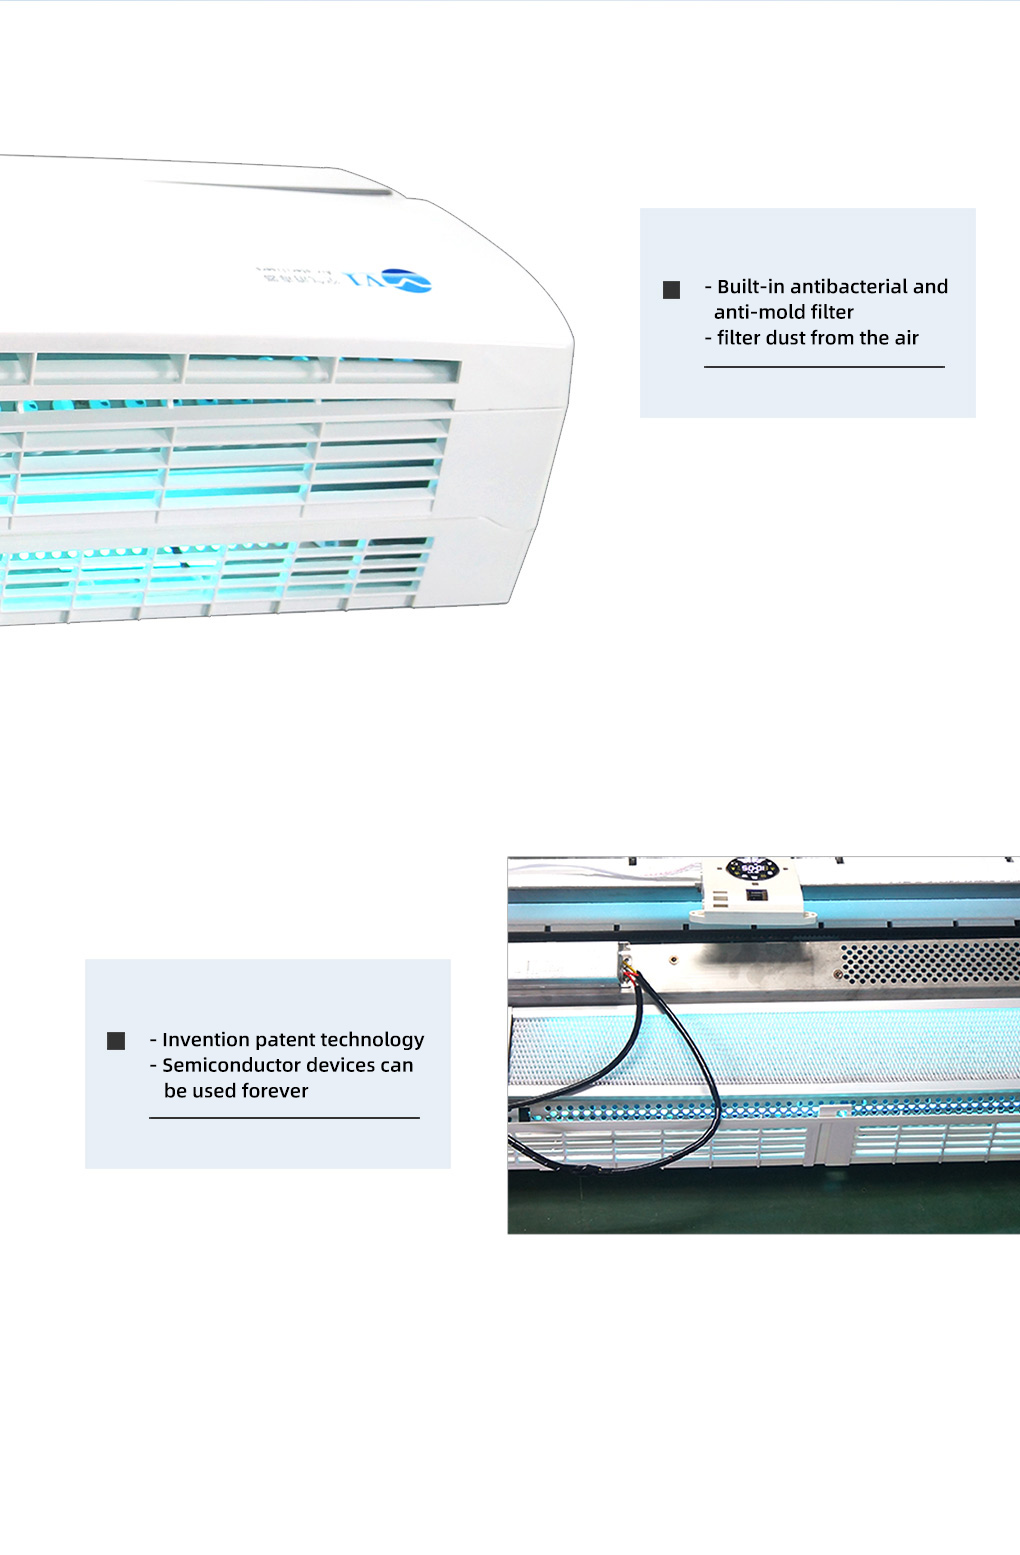 UV Wall Mounted Air Purifier and Disinfector